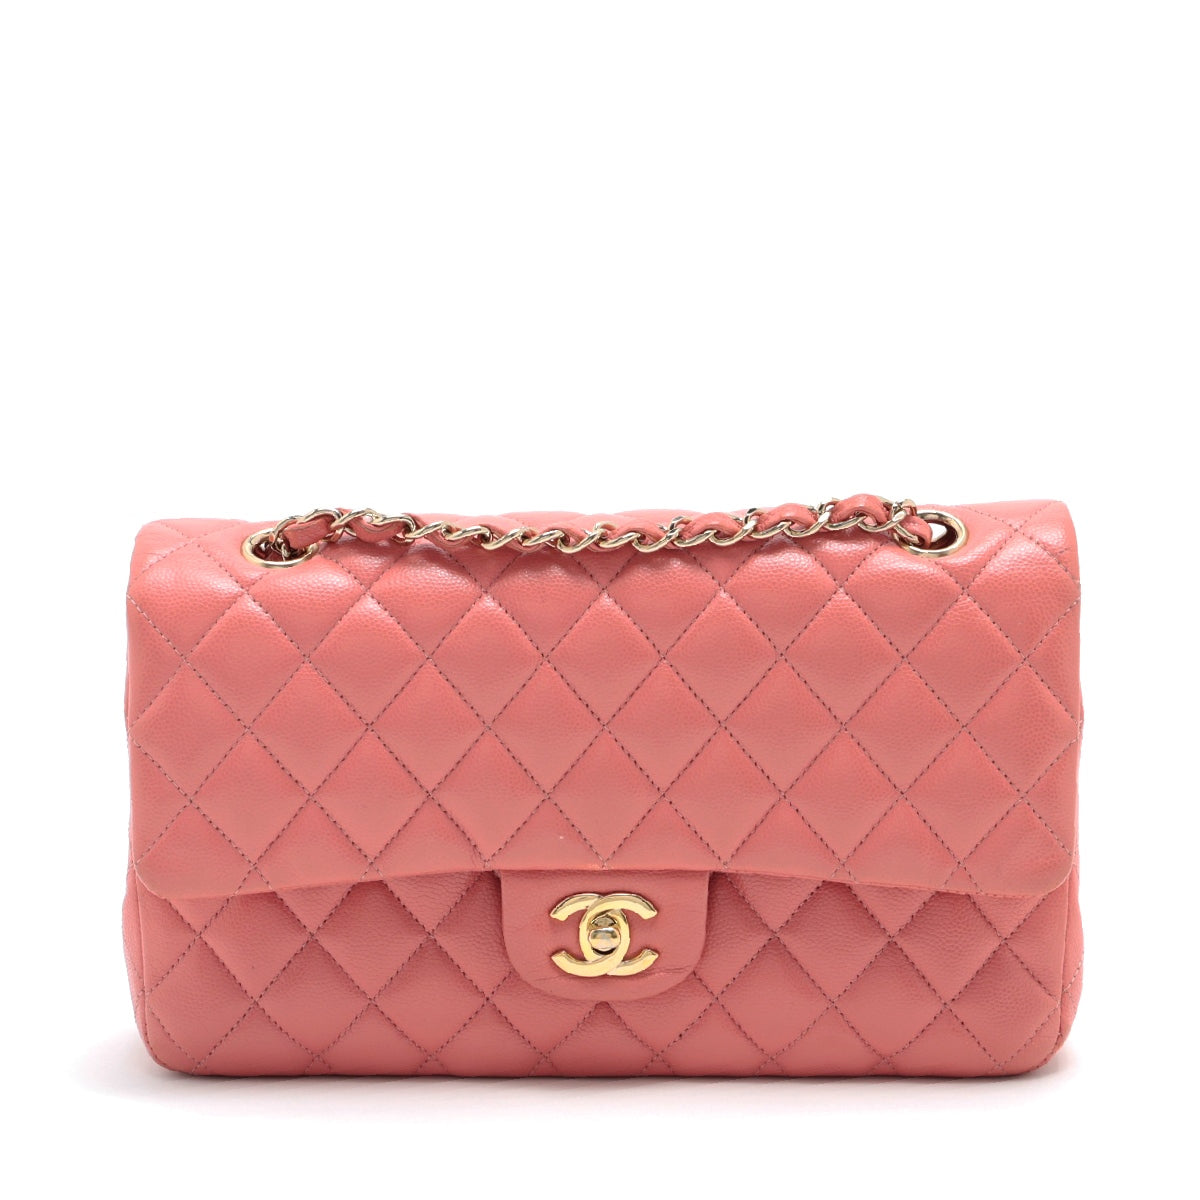 Chanel Matelasse Caviarskin Double flap Double chain bag Pink Gold Metal fittings 28th